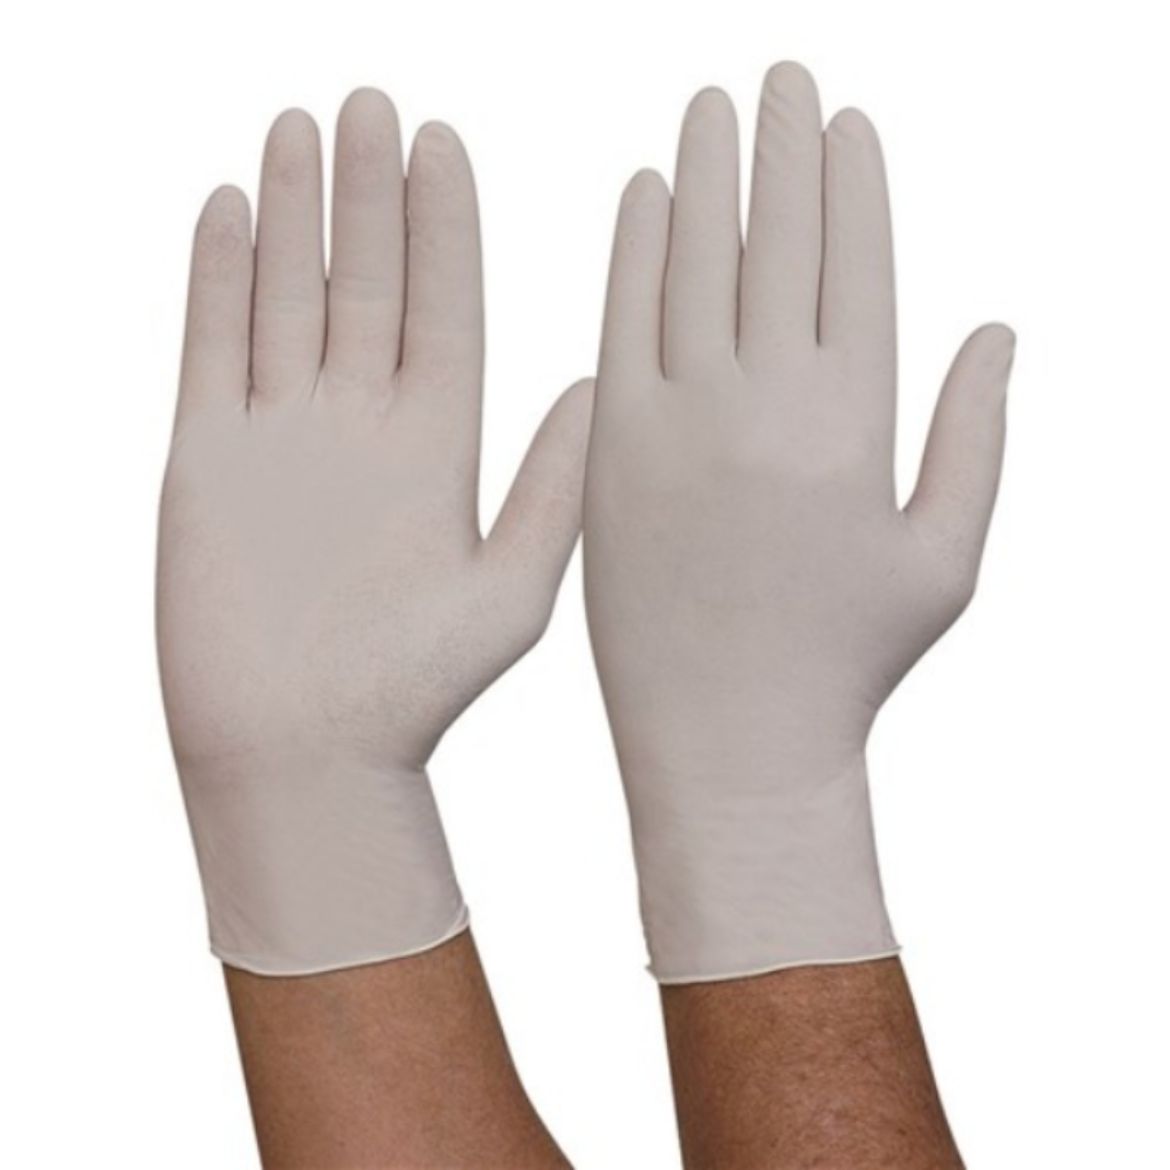 Picture of WHITE POWDERED DISPOSABLE LATEX GLOVES. AVAILABLE IN SIZES S/M/L/XL